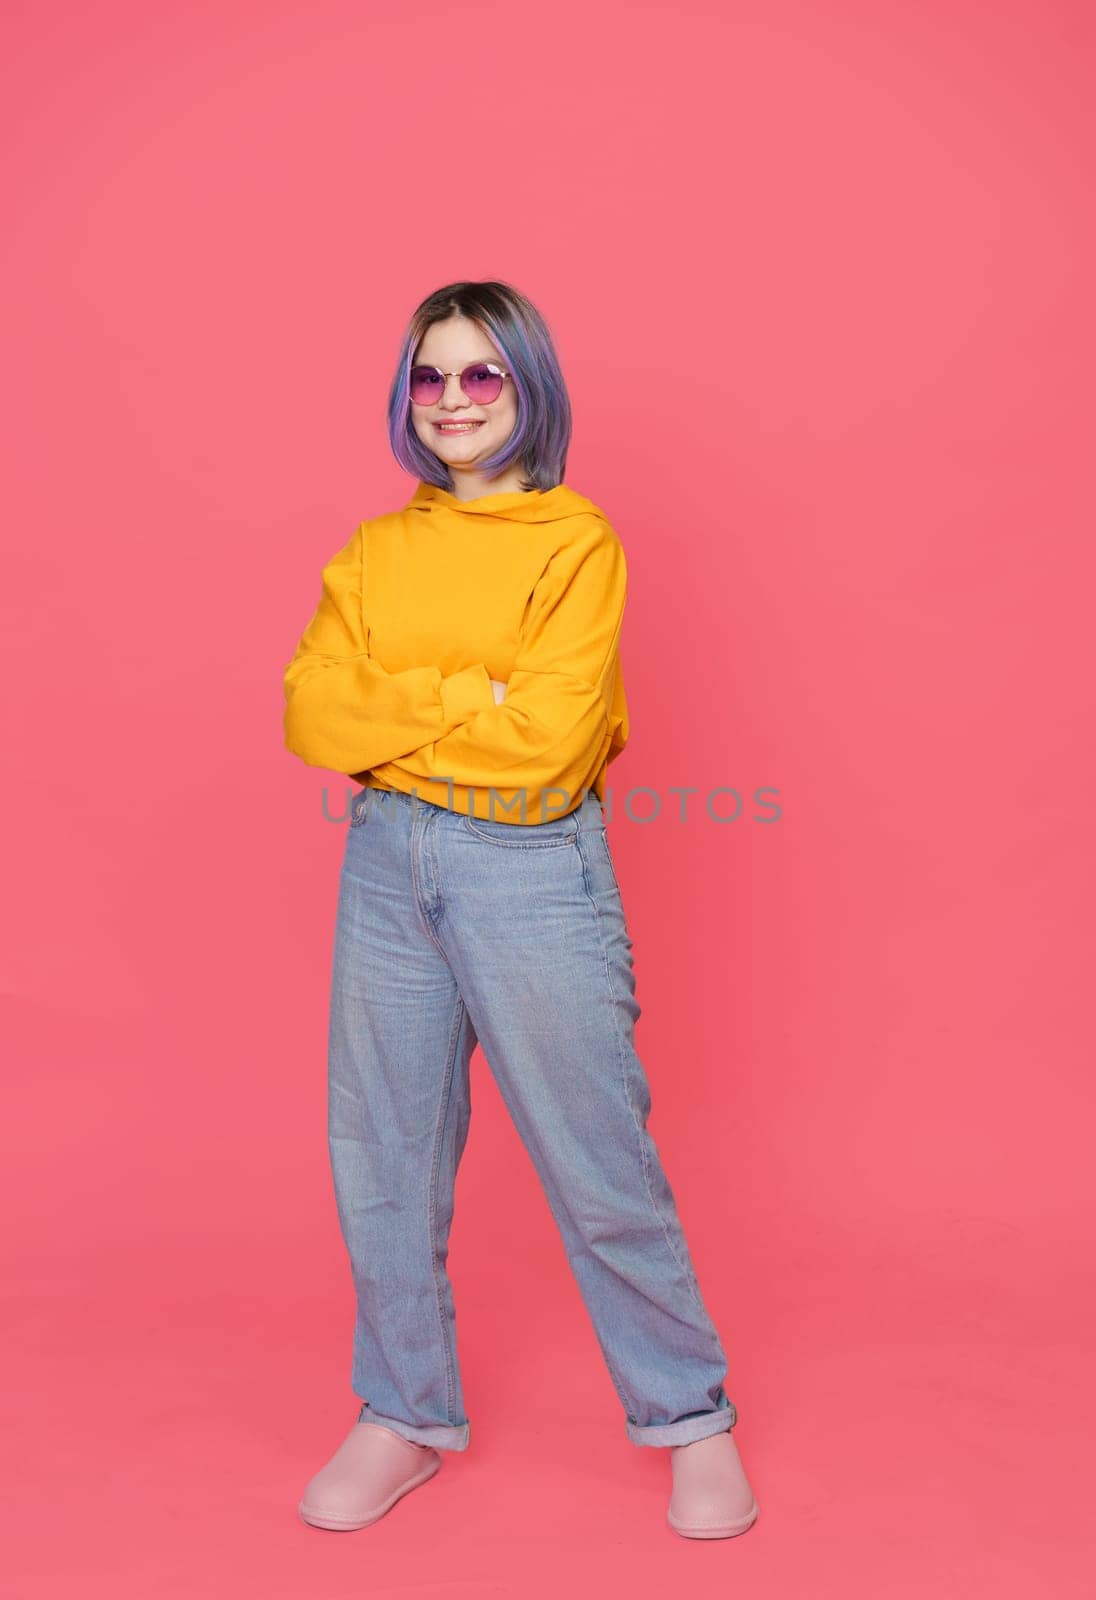 Smiling Asian teenager in crossed hands position with colored hair stylishly dressed in yellow jacket, standing on pink background. Youth culture, girl's expressive style and personality in contemporary and modern setting. Full-length portrait, . High quality photo